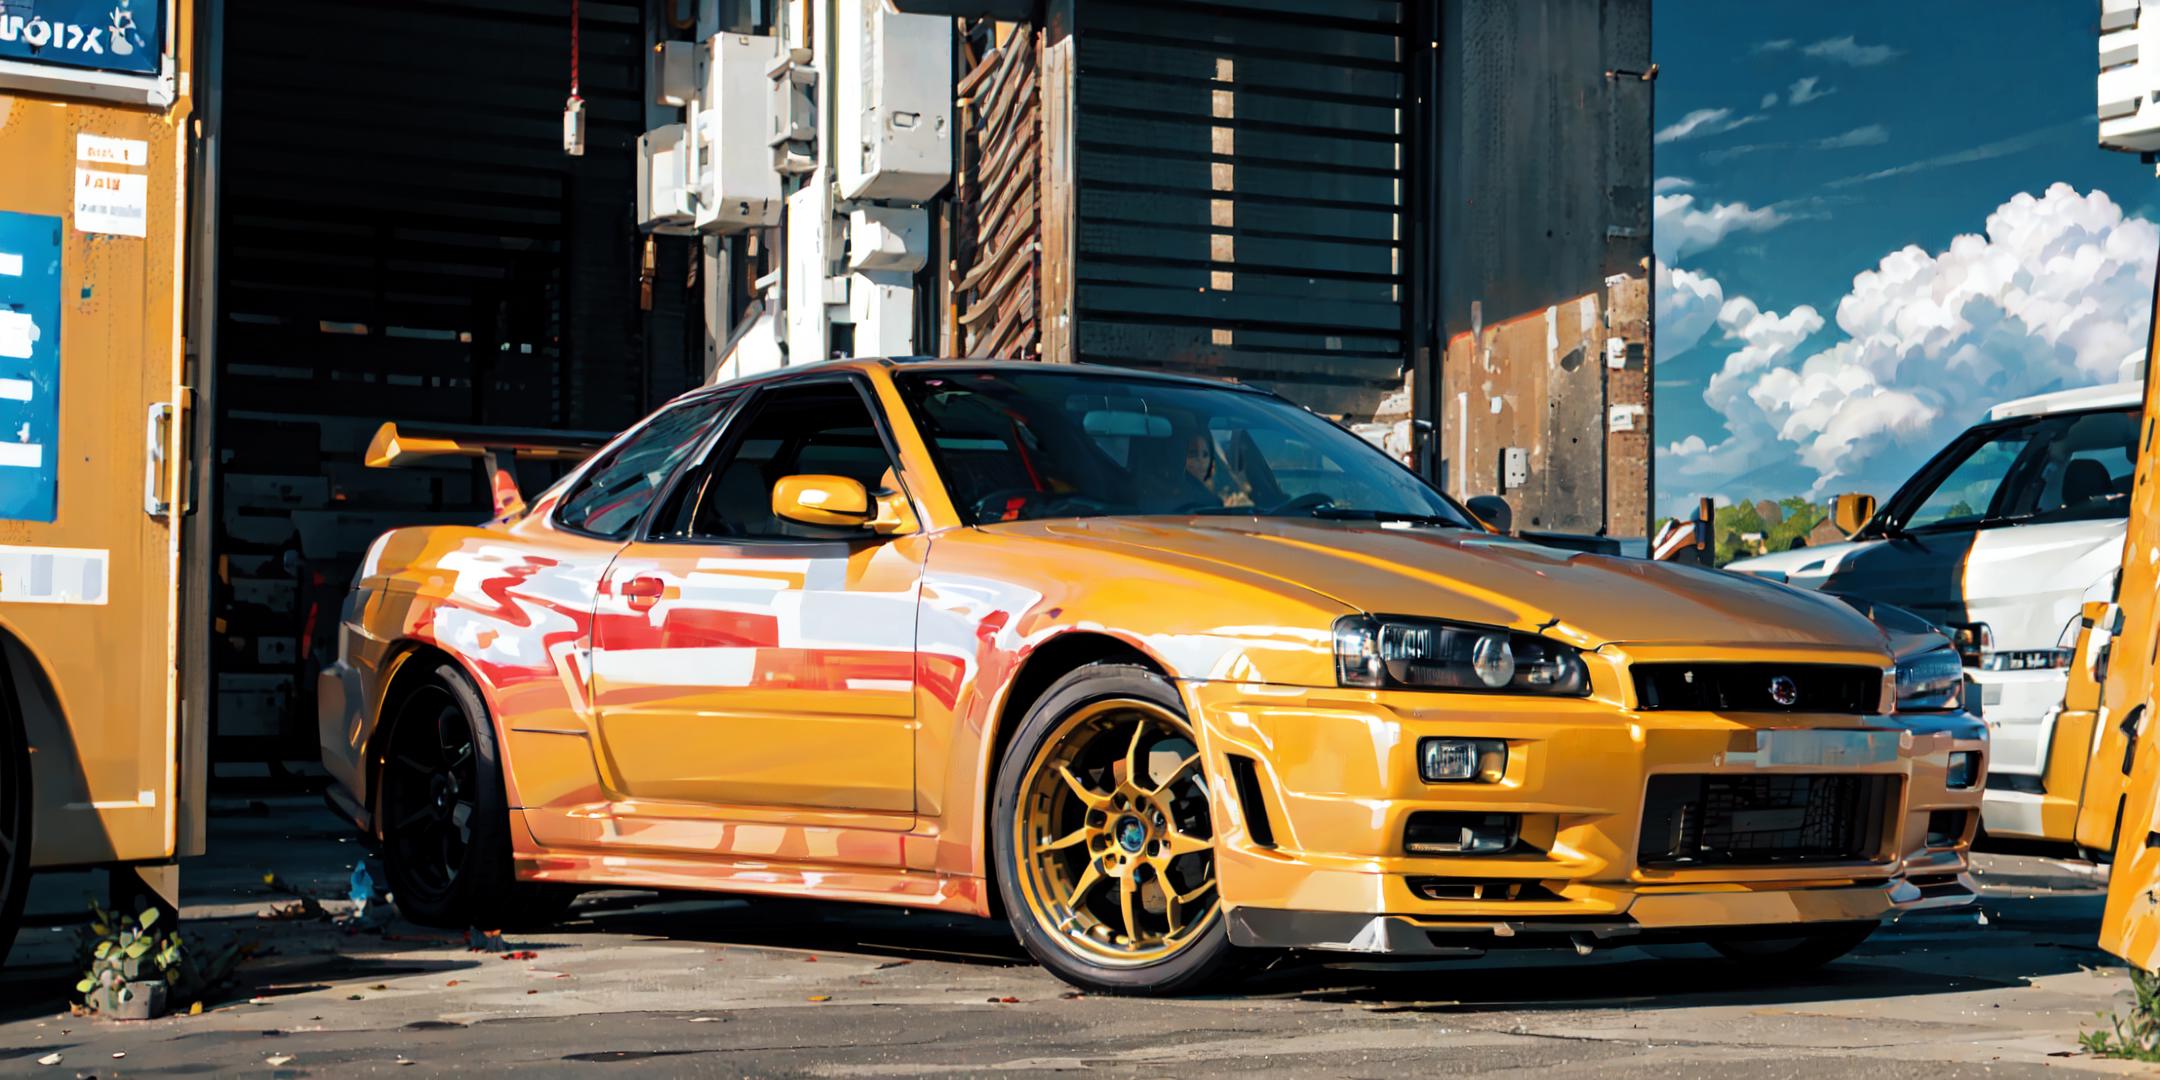 NISSAN Skyline GT-R R34 car LORA image by Mikoeiaow